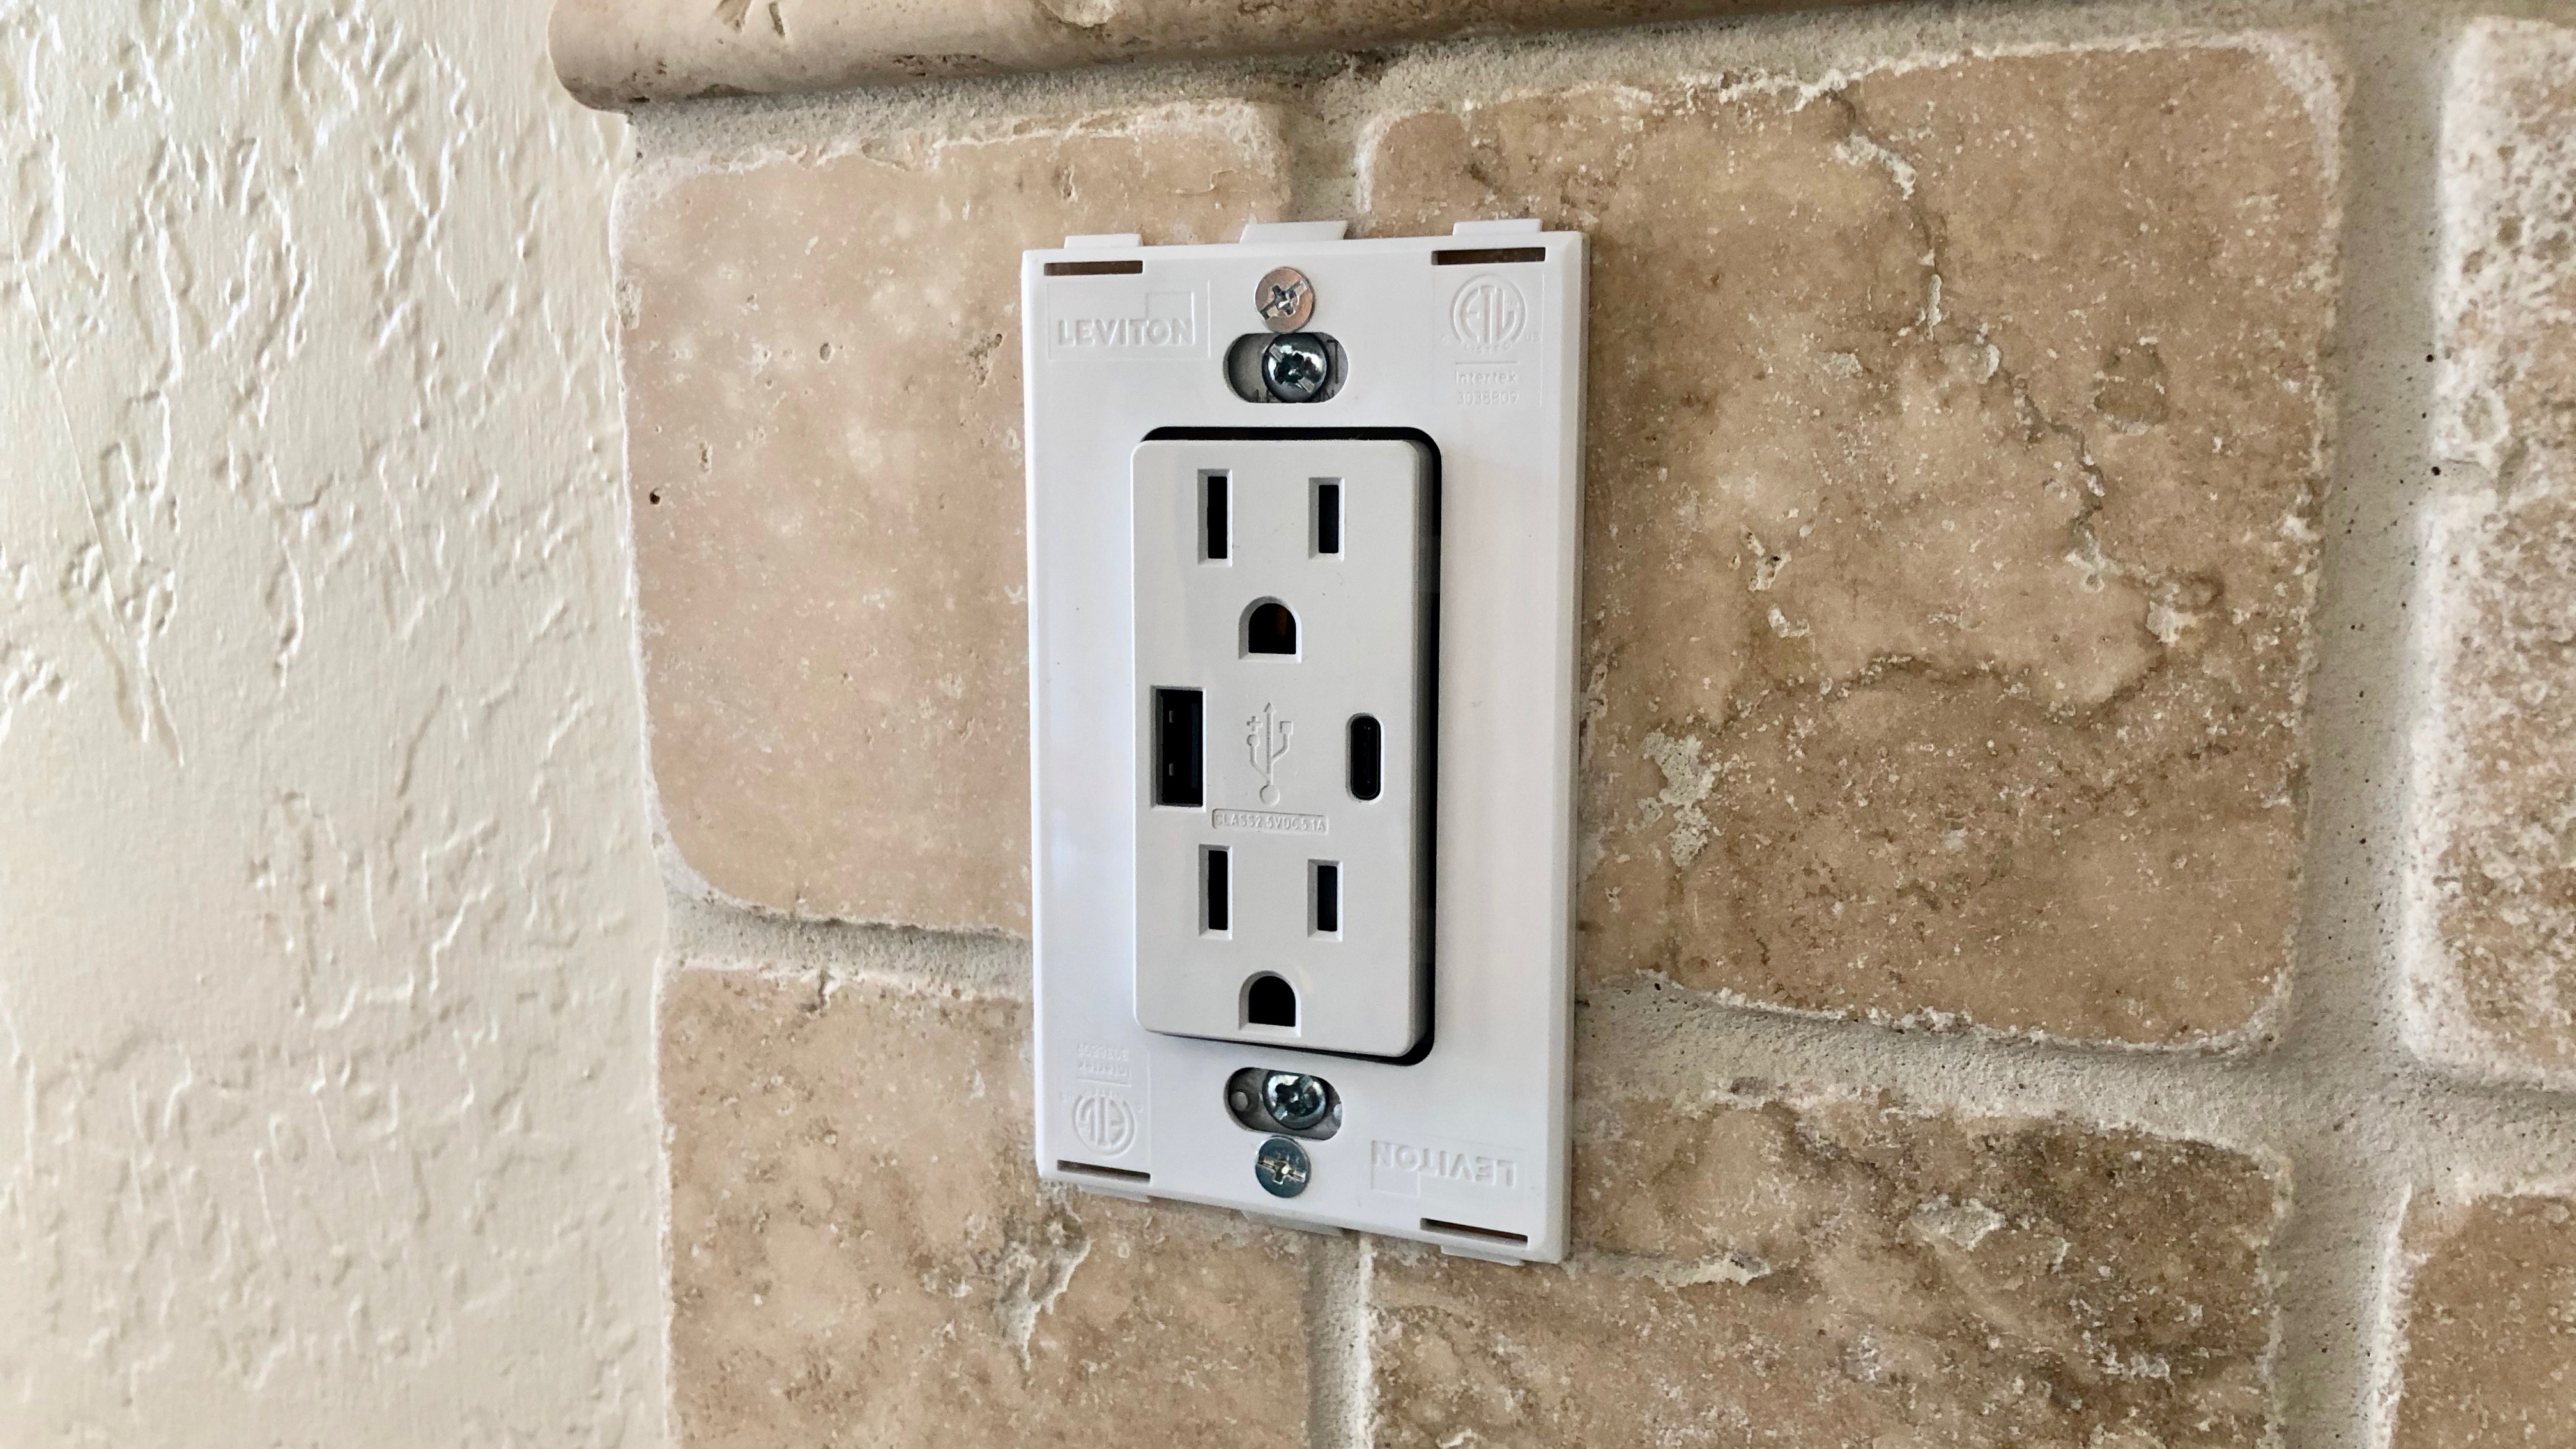 Review: Leviton’s USB-C & USB-A wall outlet offers lots of charging convenience - 9to5Mac